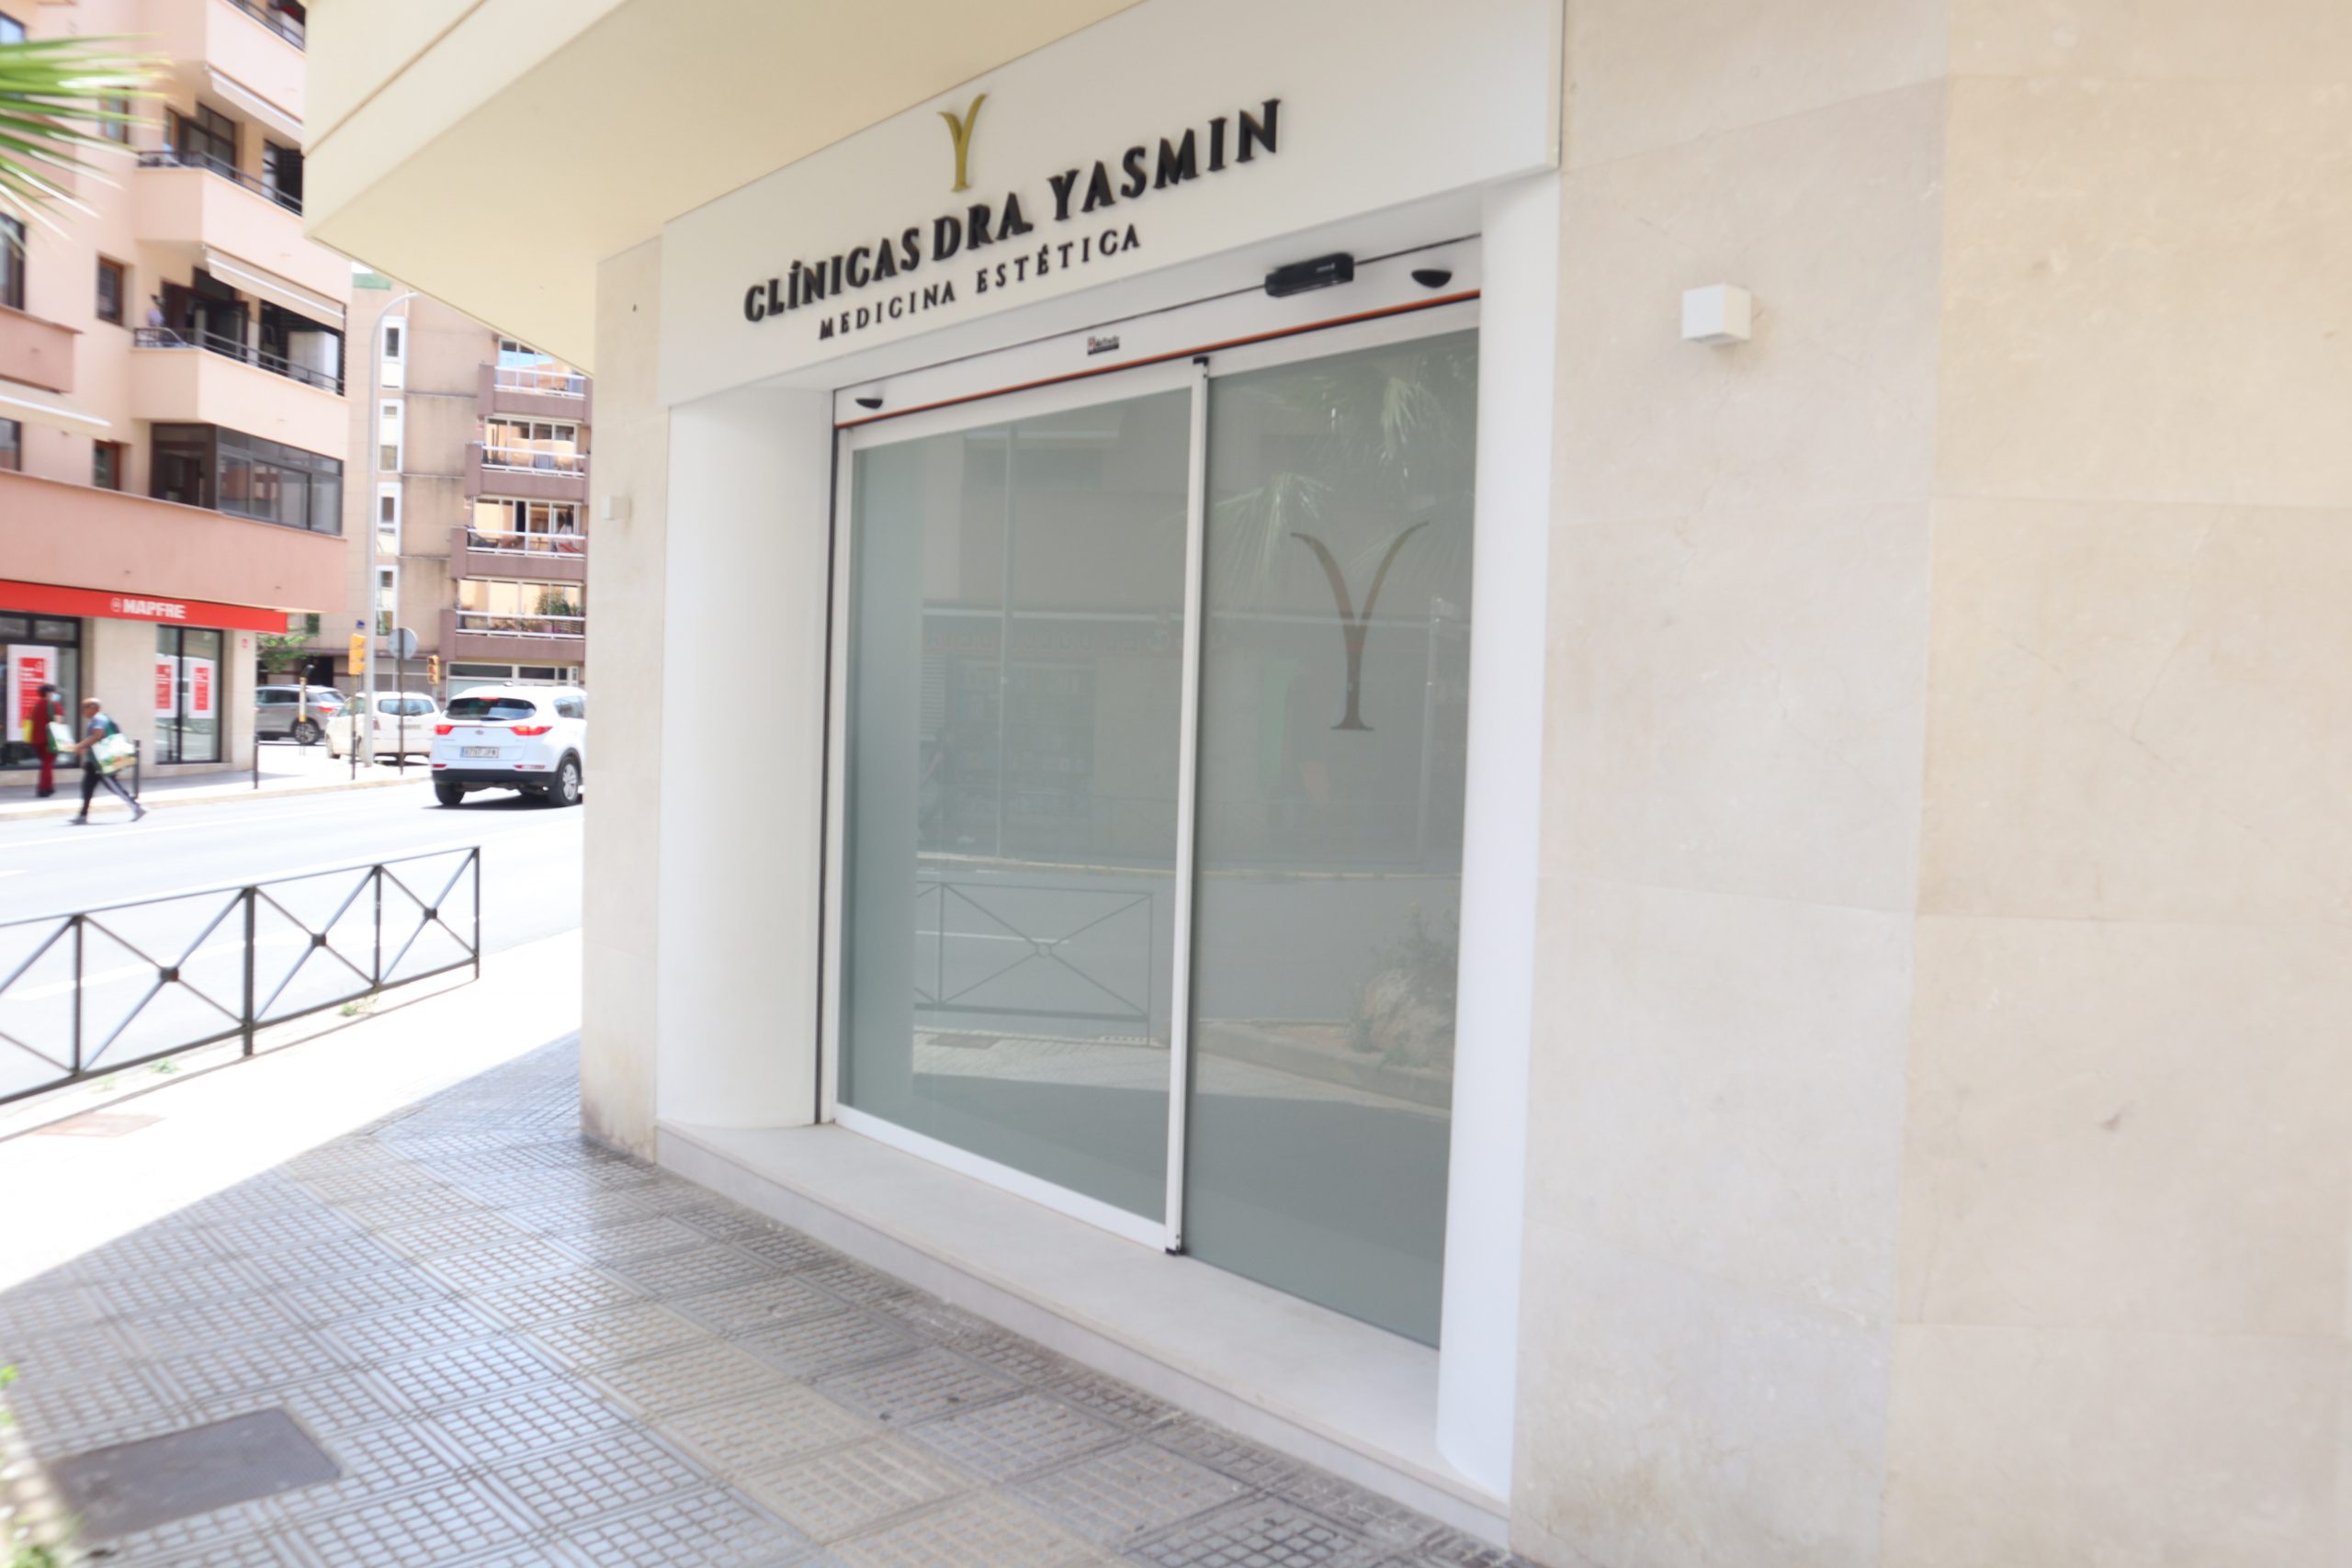 Aesthetic clinic in Ibiza. Where you should trust your beauty